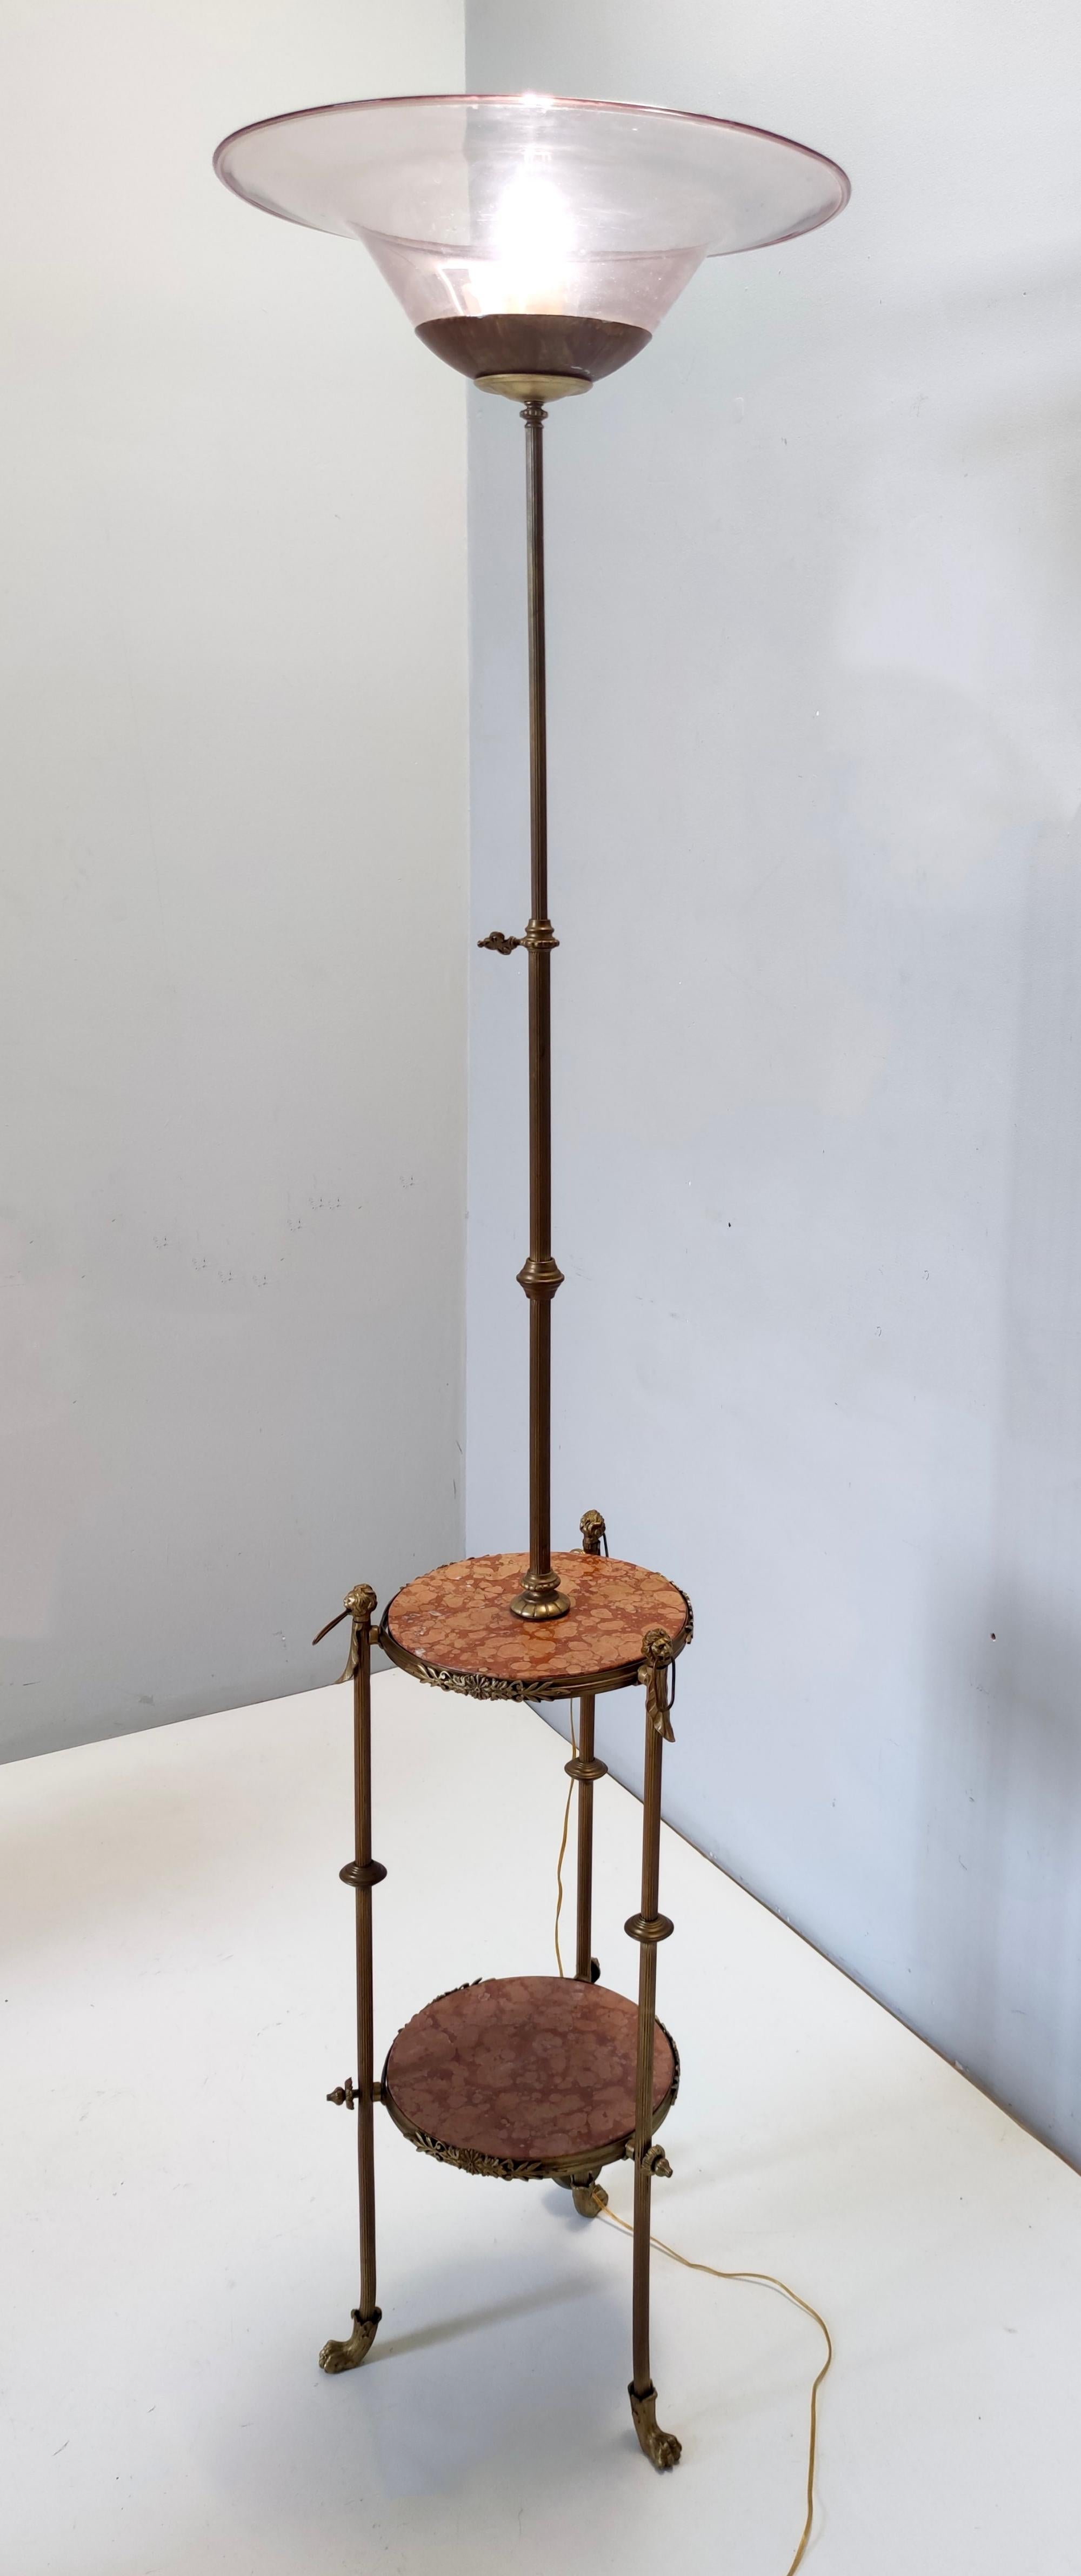 Made in Italy, 1920s. 
It features a brass and varnished steel frame with a red travertine tops and a Murano glass lampshade, which is hand blown by Vittorio Zecchin.
It is a Renaissance Revival style. 
It is a vintage piece, therefore it might show